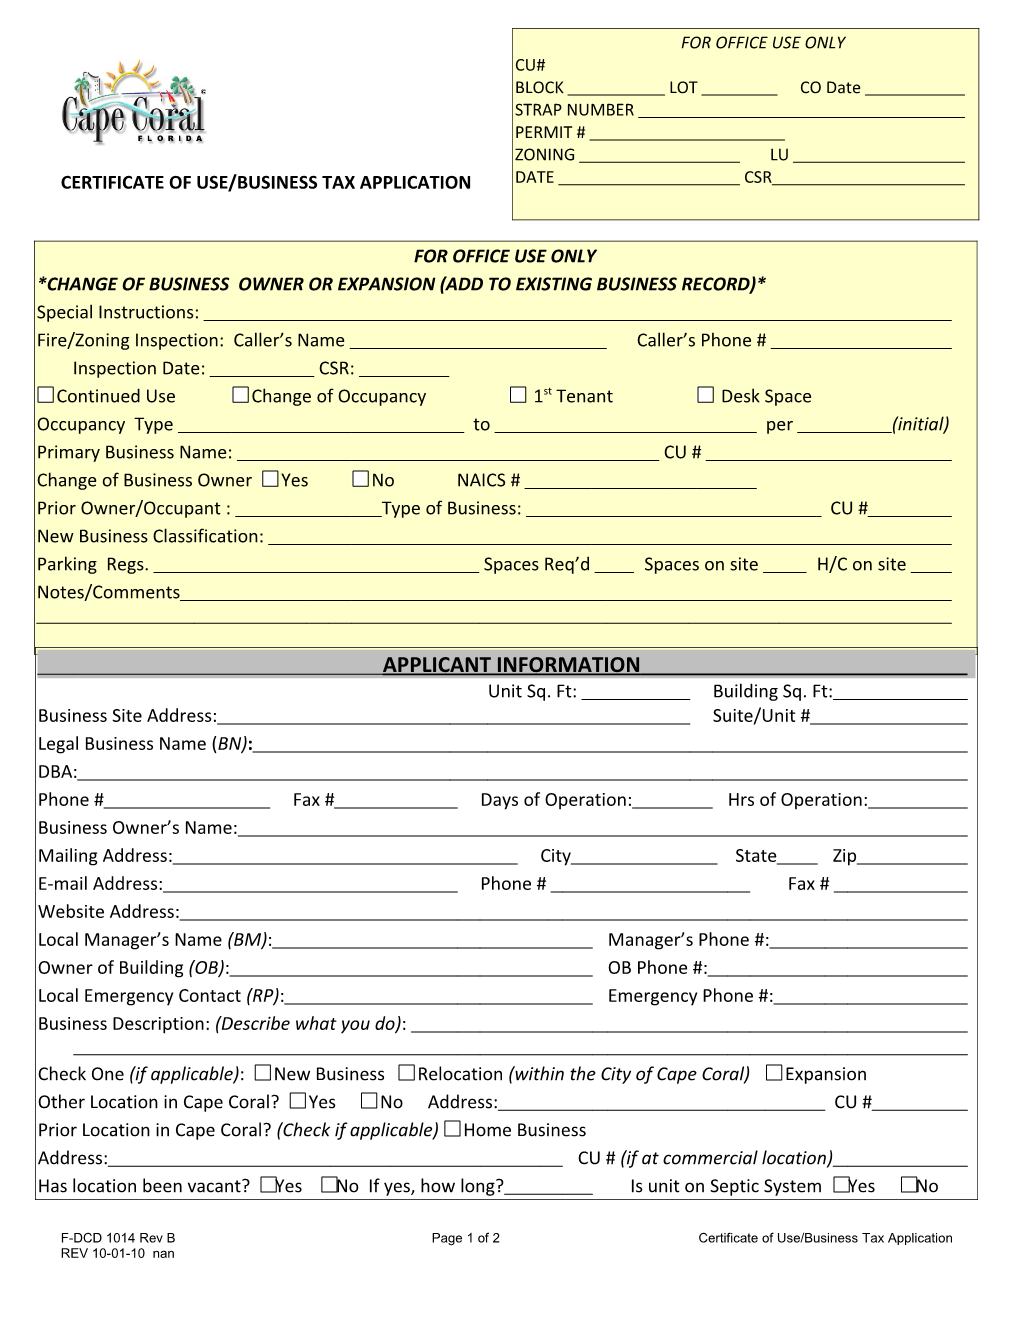 Certificate of Use/Business Tax Application Cont